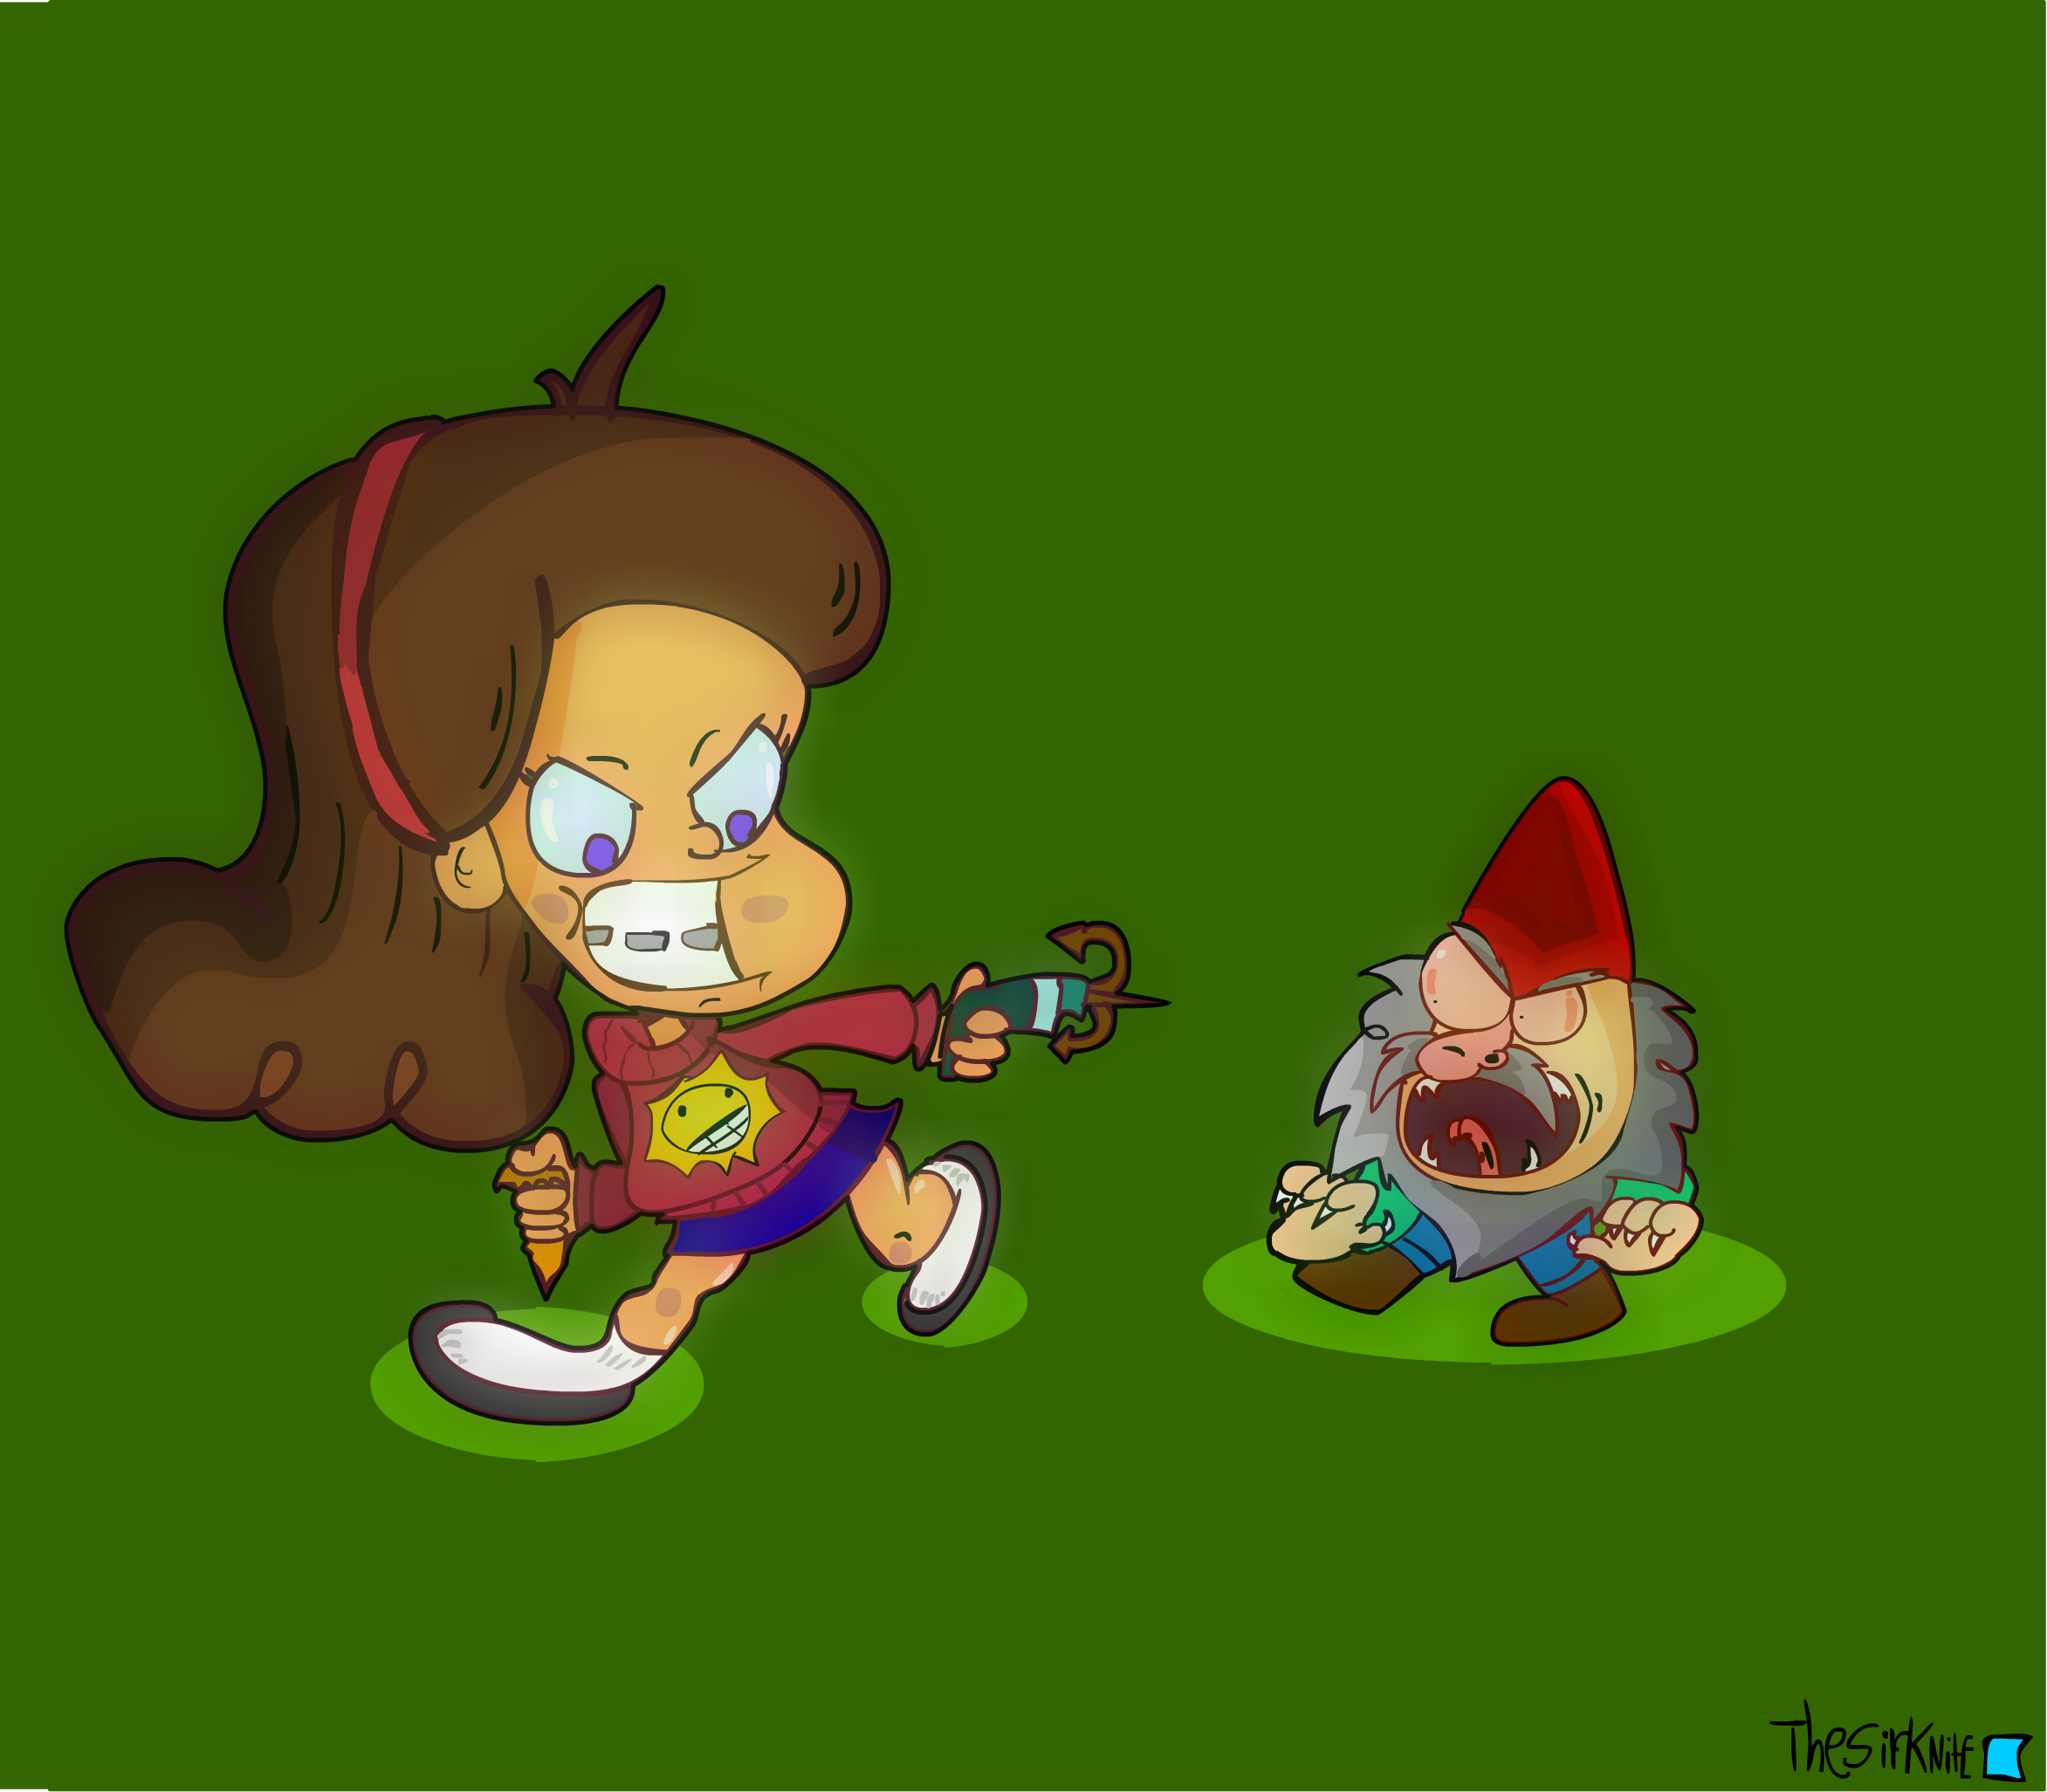 mabel_versus_gnome_by_thesirknite-d54yoxr.png